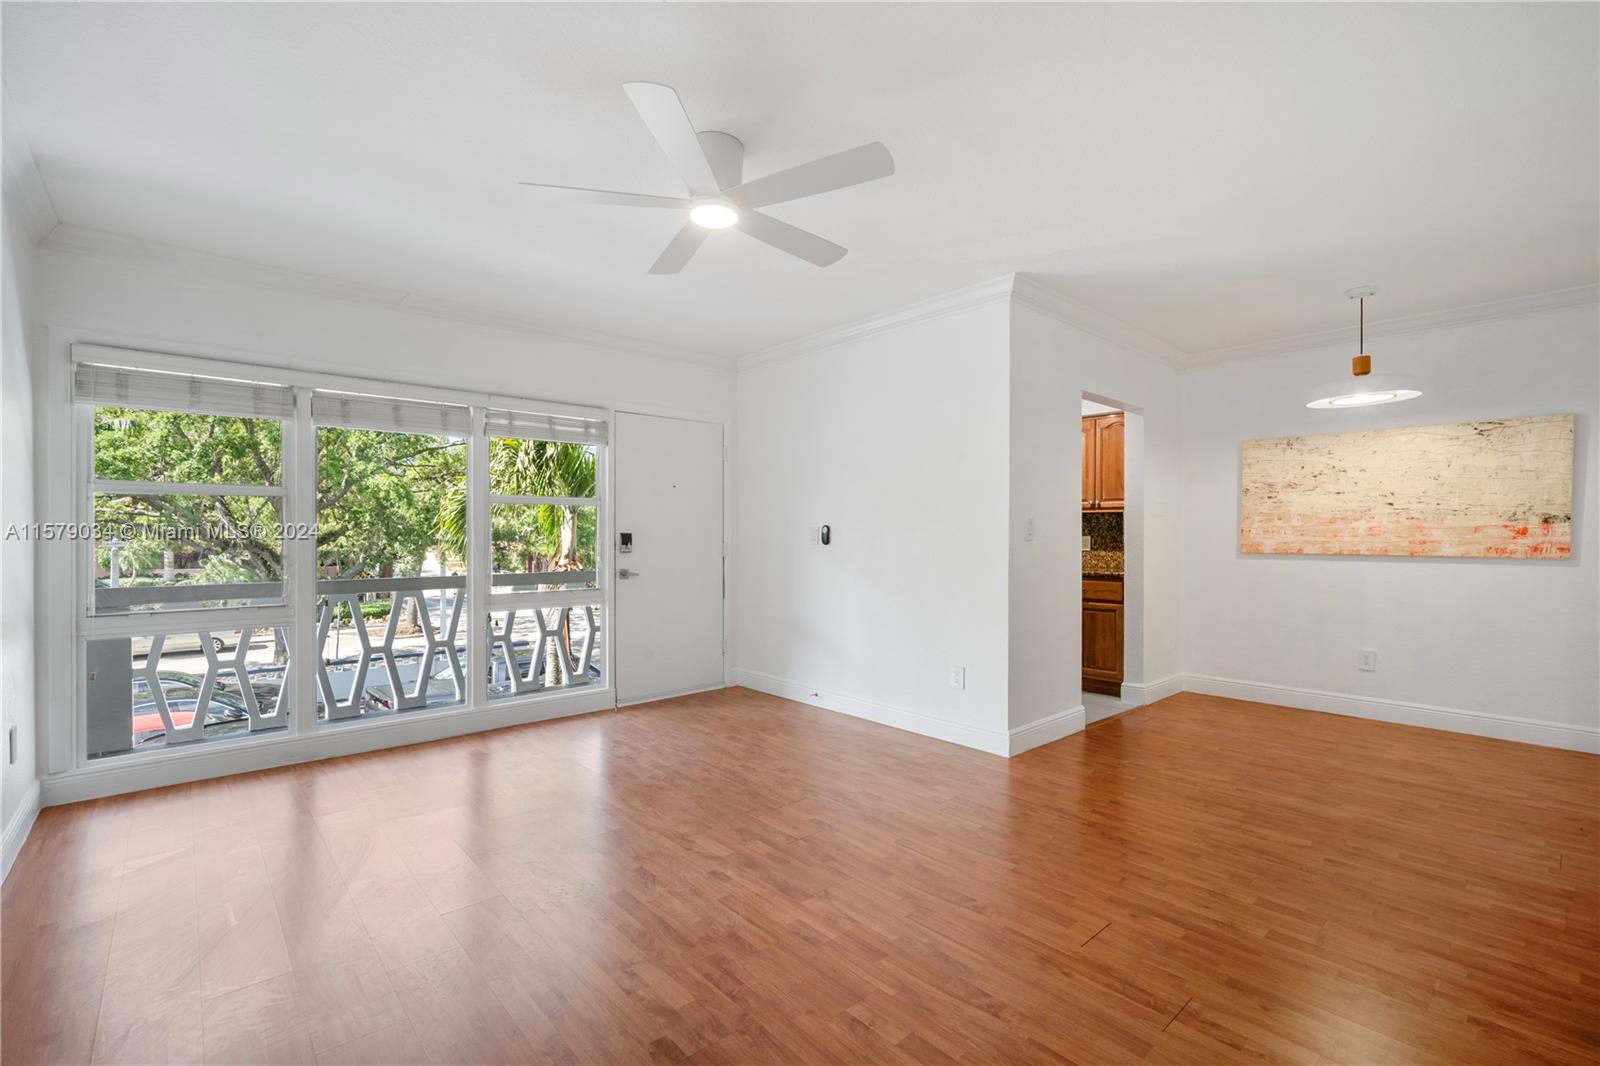 21 Edgewater Dr #204, Coral Gables FL 33133